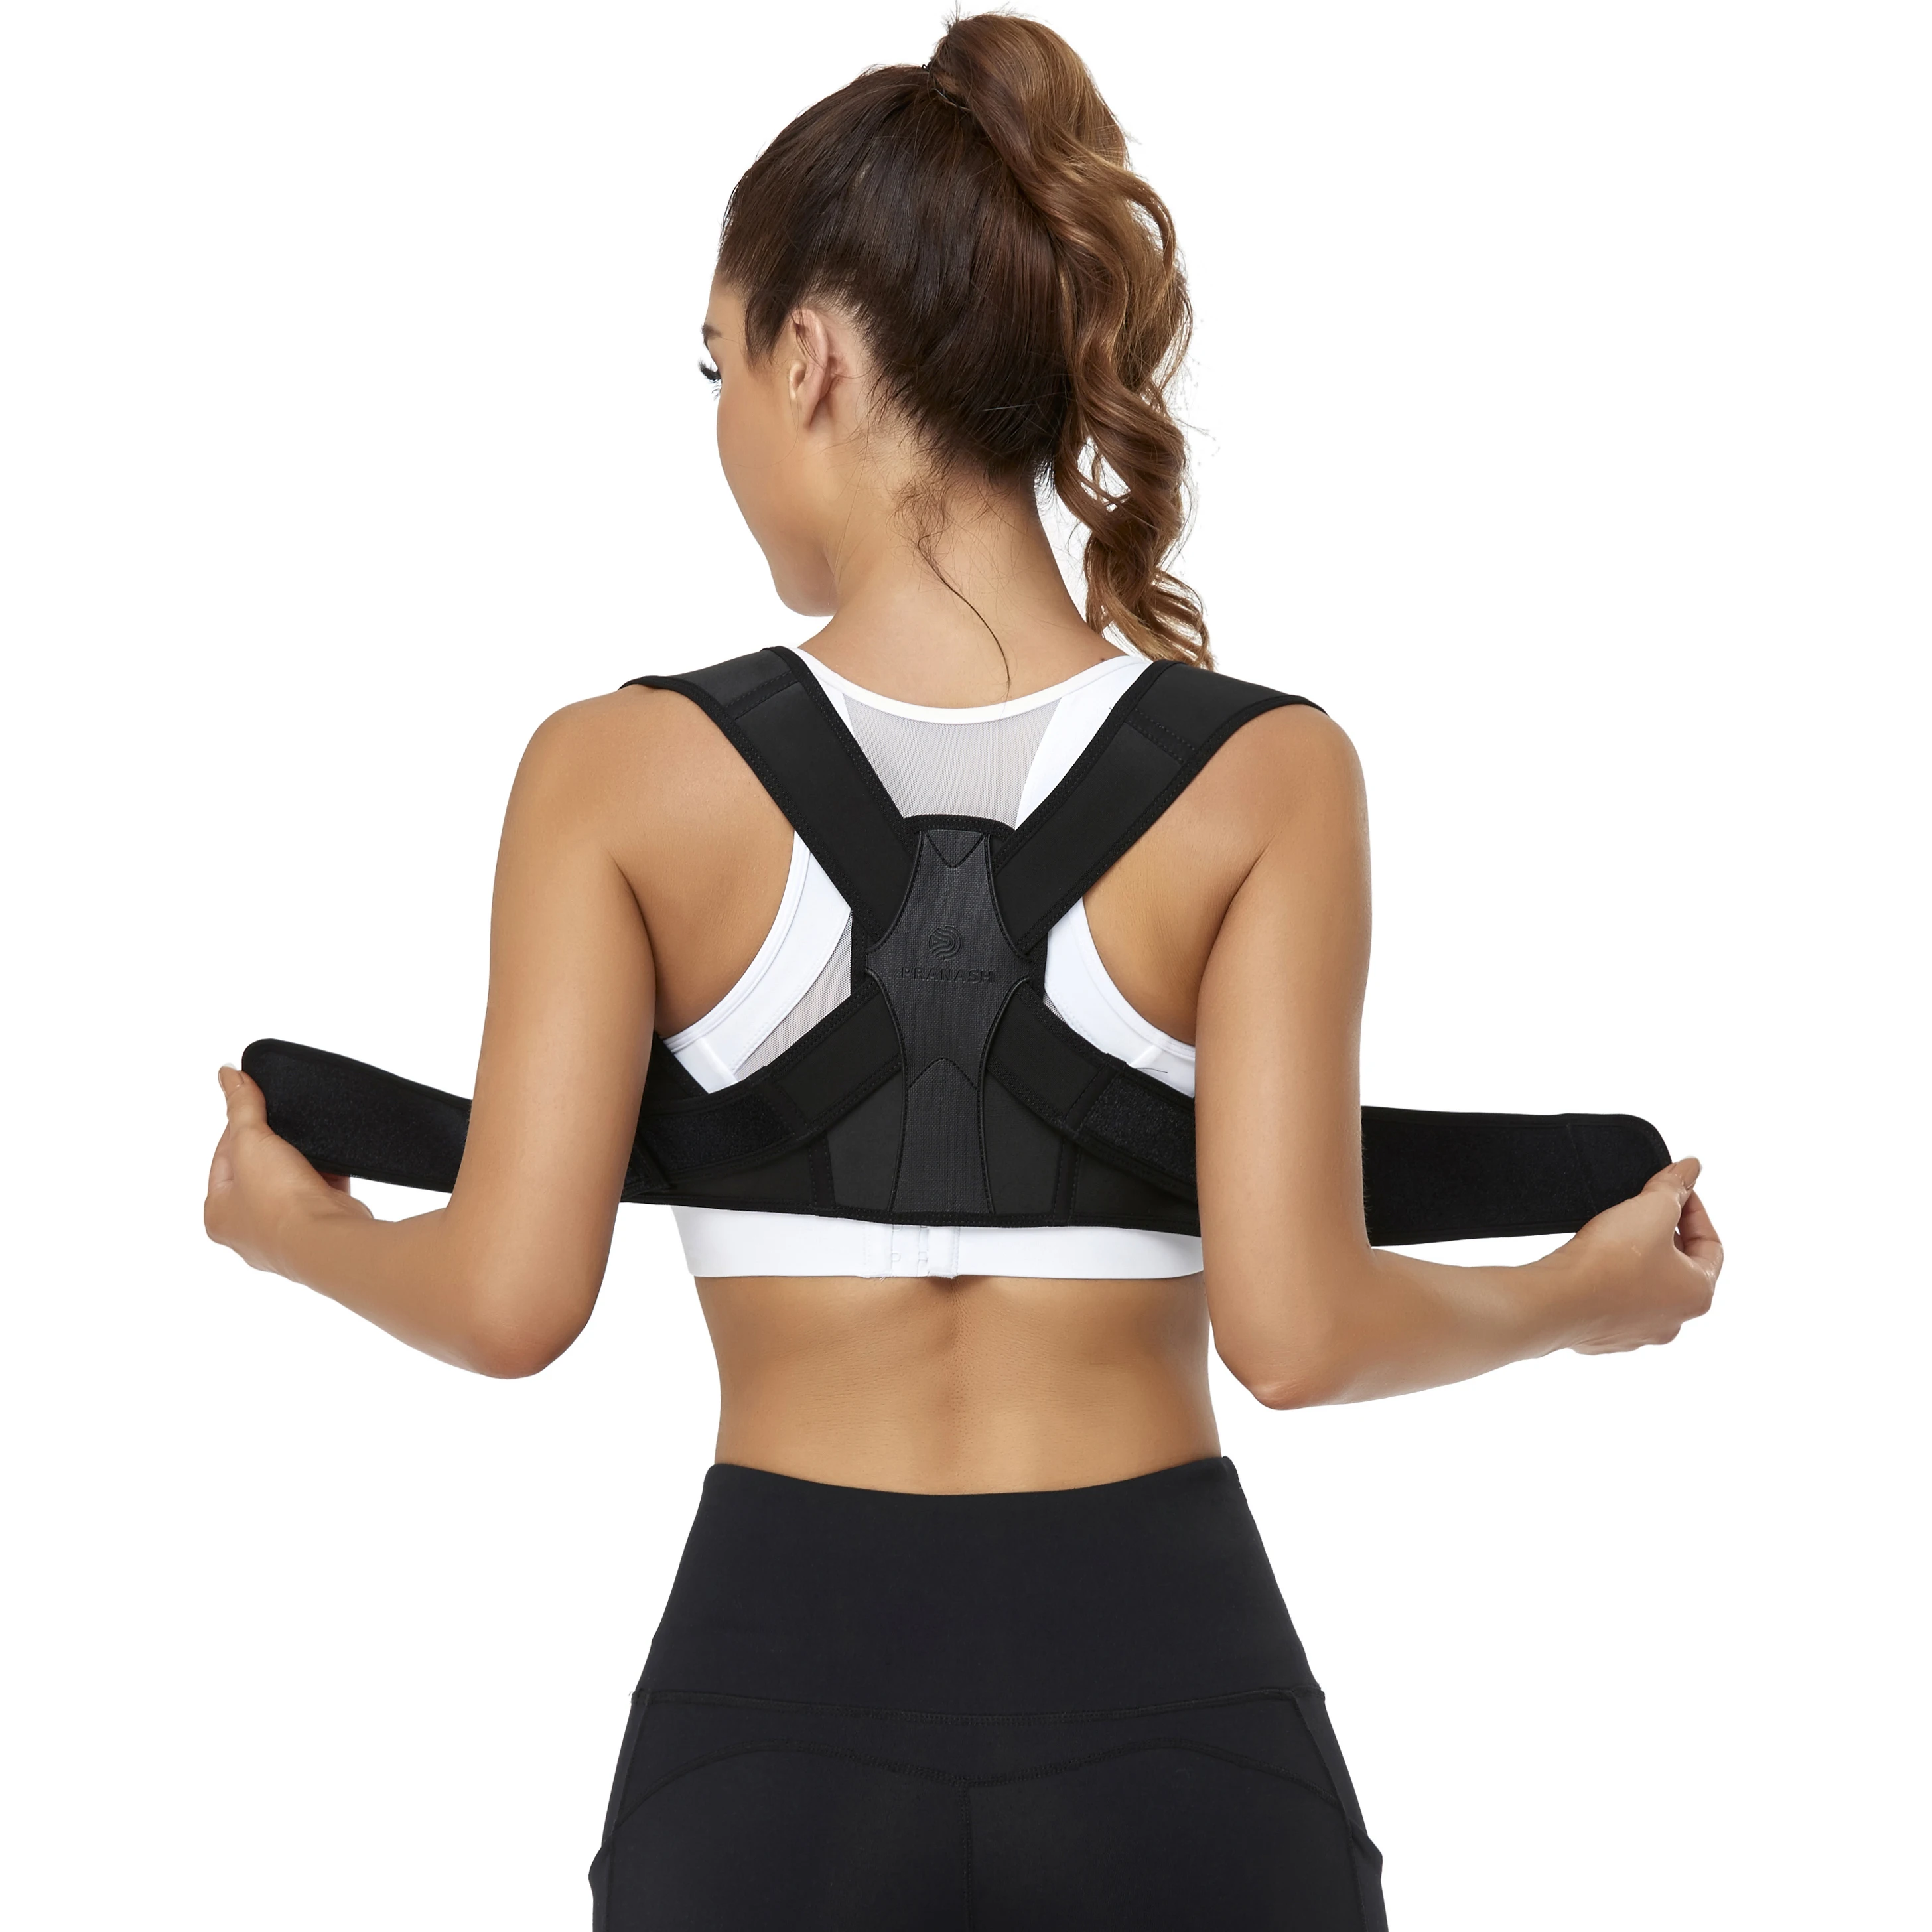 

2021 New Products Back Posture Corrector Unisex Comfortable Corrector De Postura Support Exercises to Improve Bad Posture, Black,pink,blue,nude